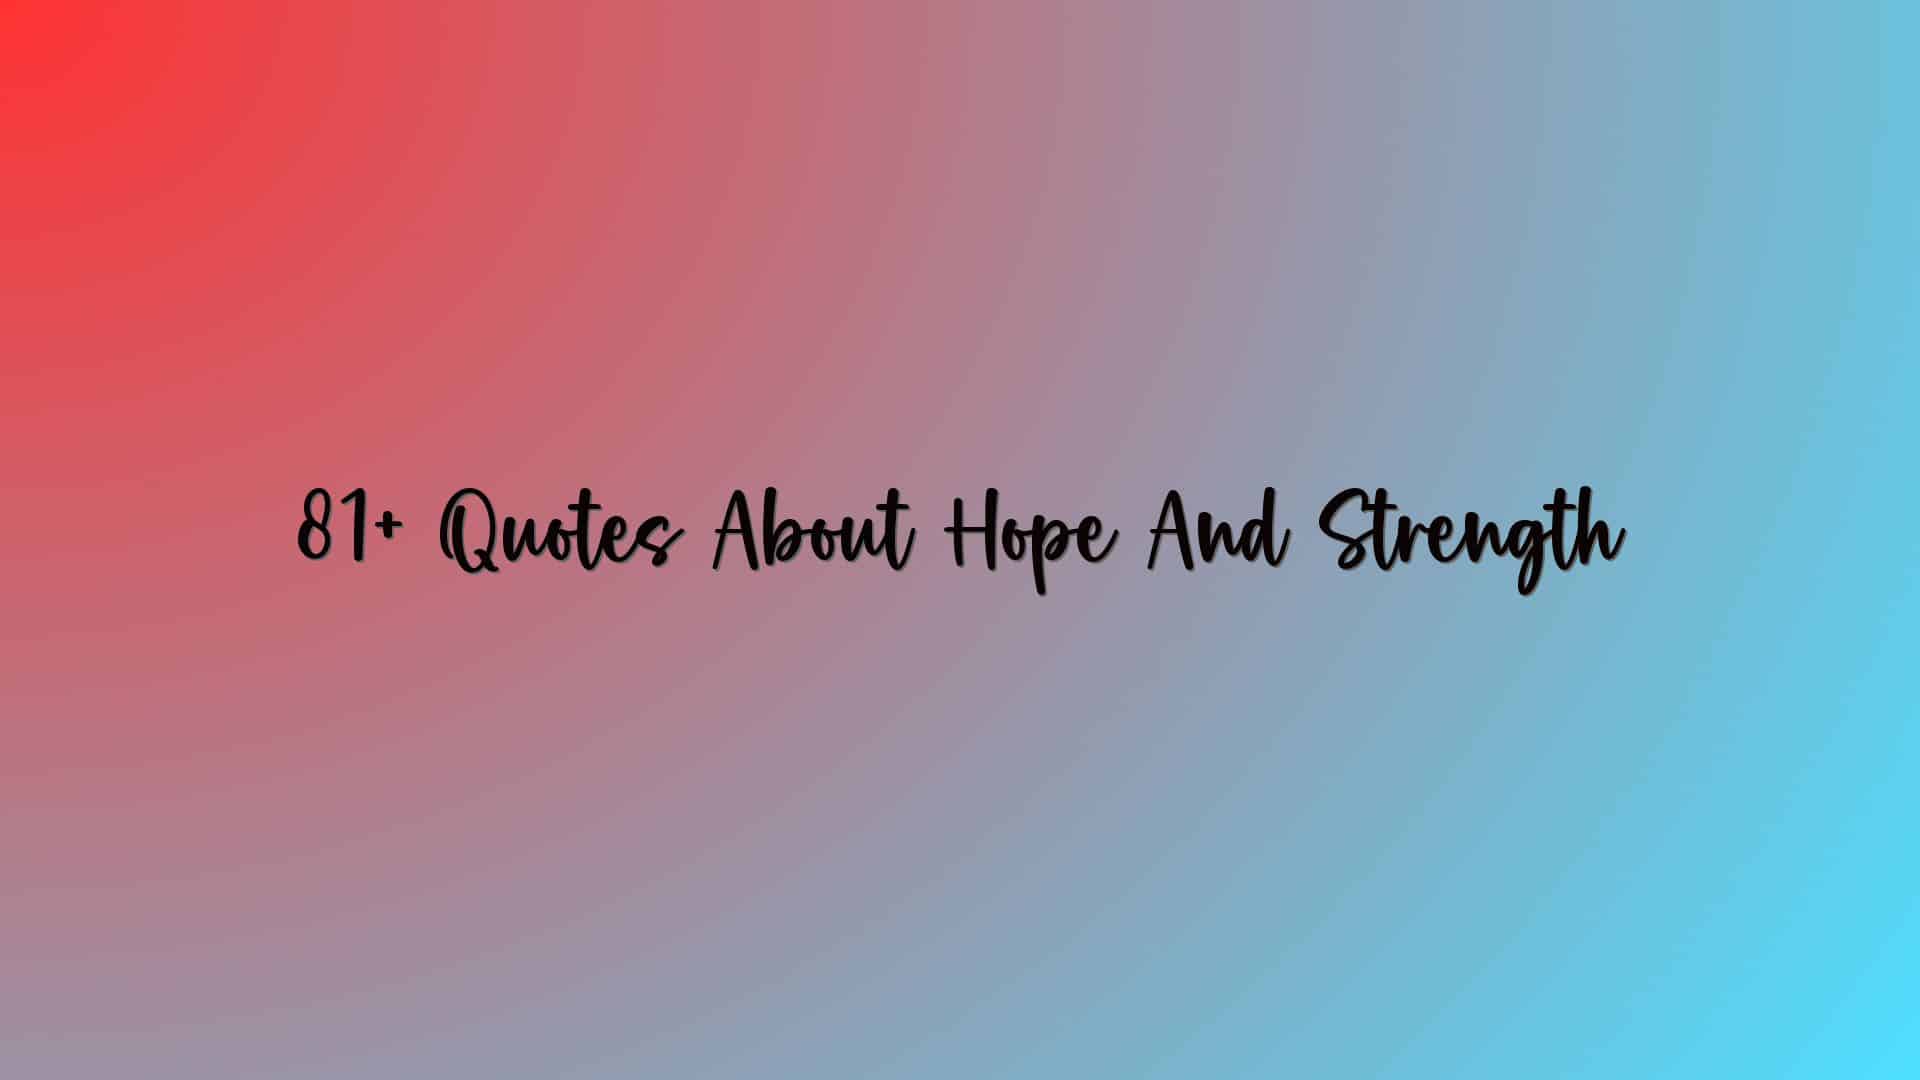 81+ Quotes About Hope And Strength